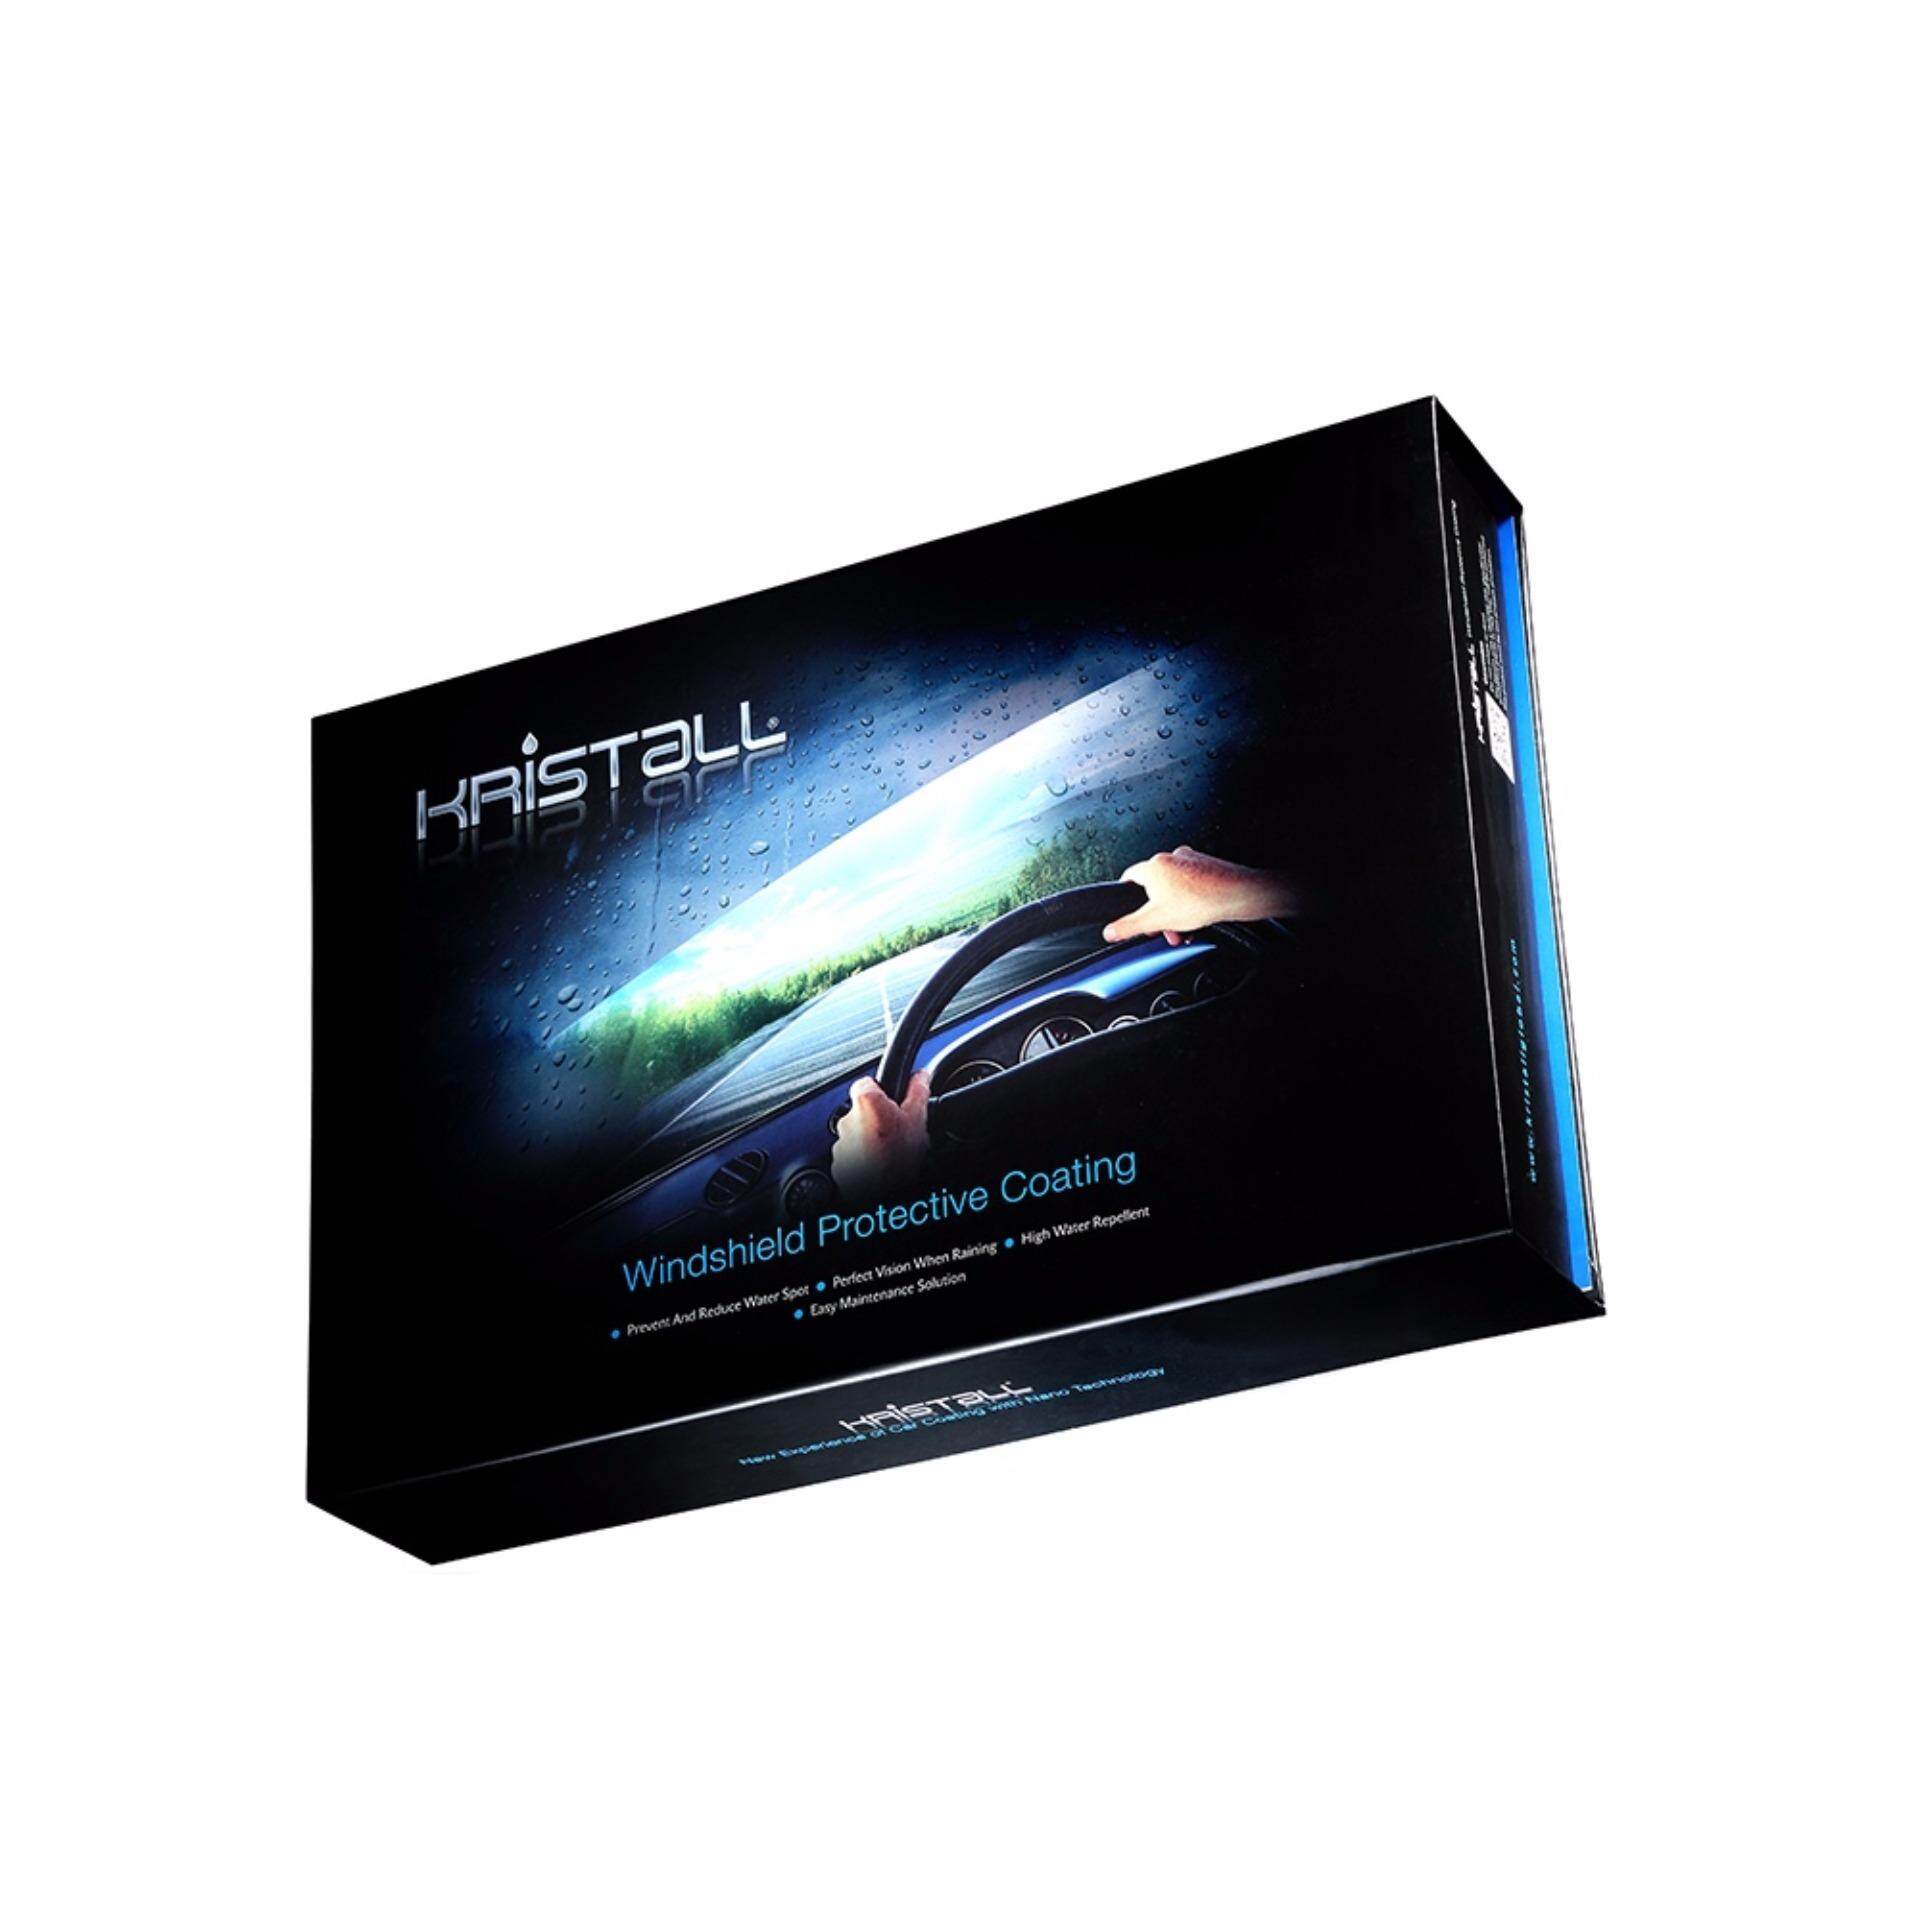 Kristall® Car Windshield and Glass Protection Coating Kit - Rain and Water Repellent, UV Resistance, Super Hydrophobic